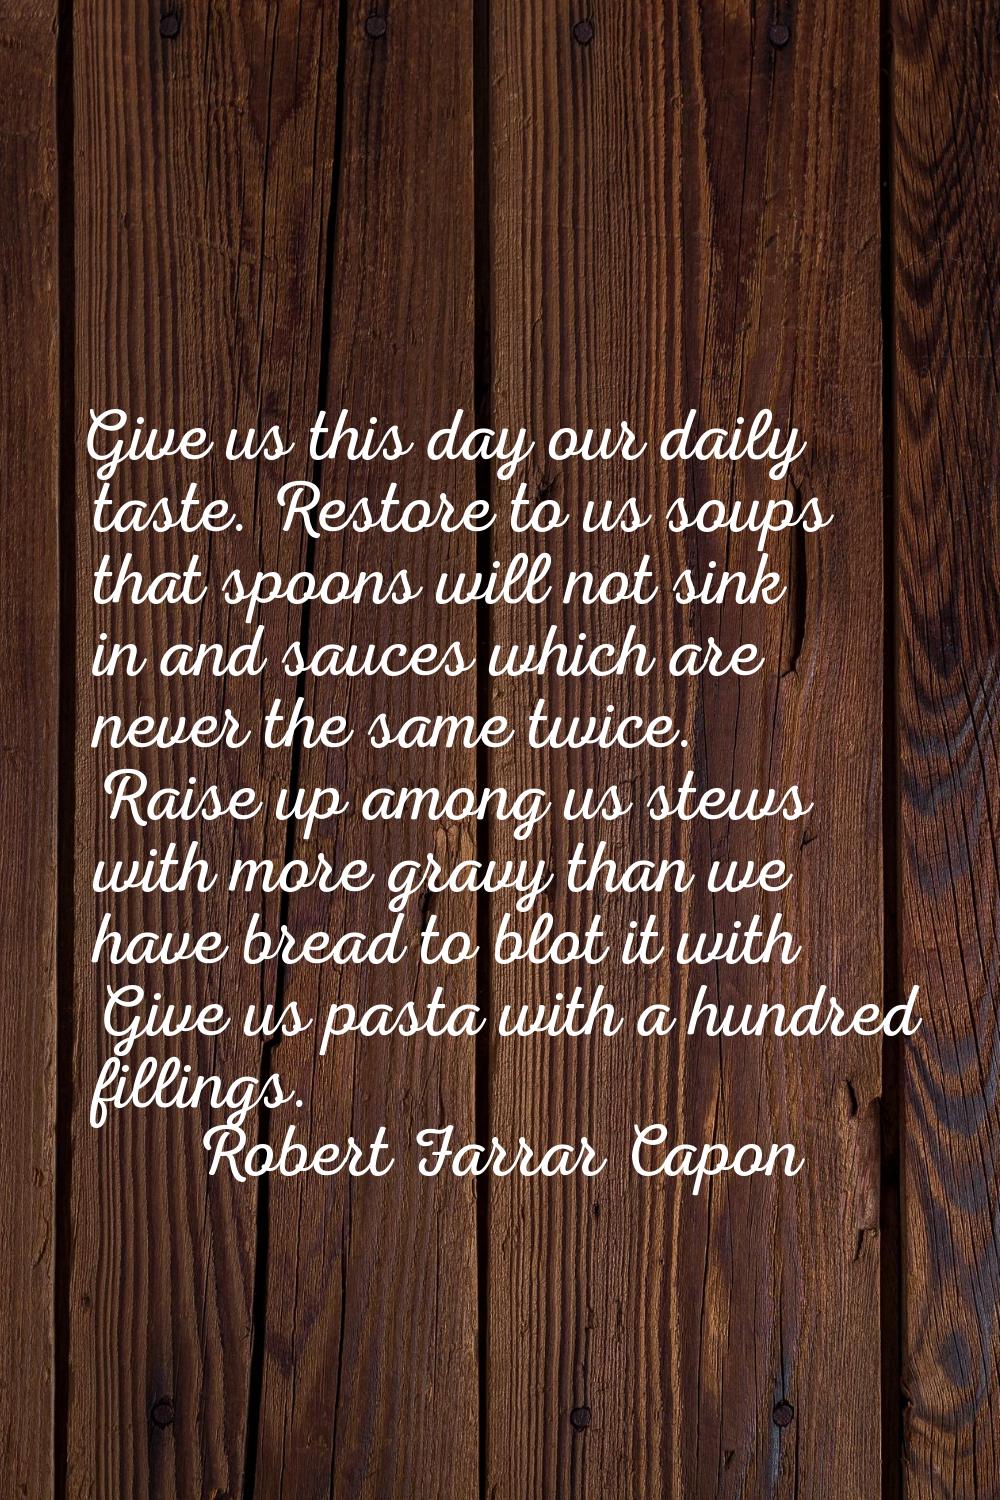 Give us this day our daily taste. Restore to us soups that spoons will not sink in and sauces which